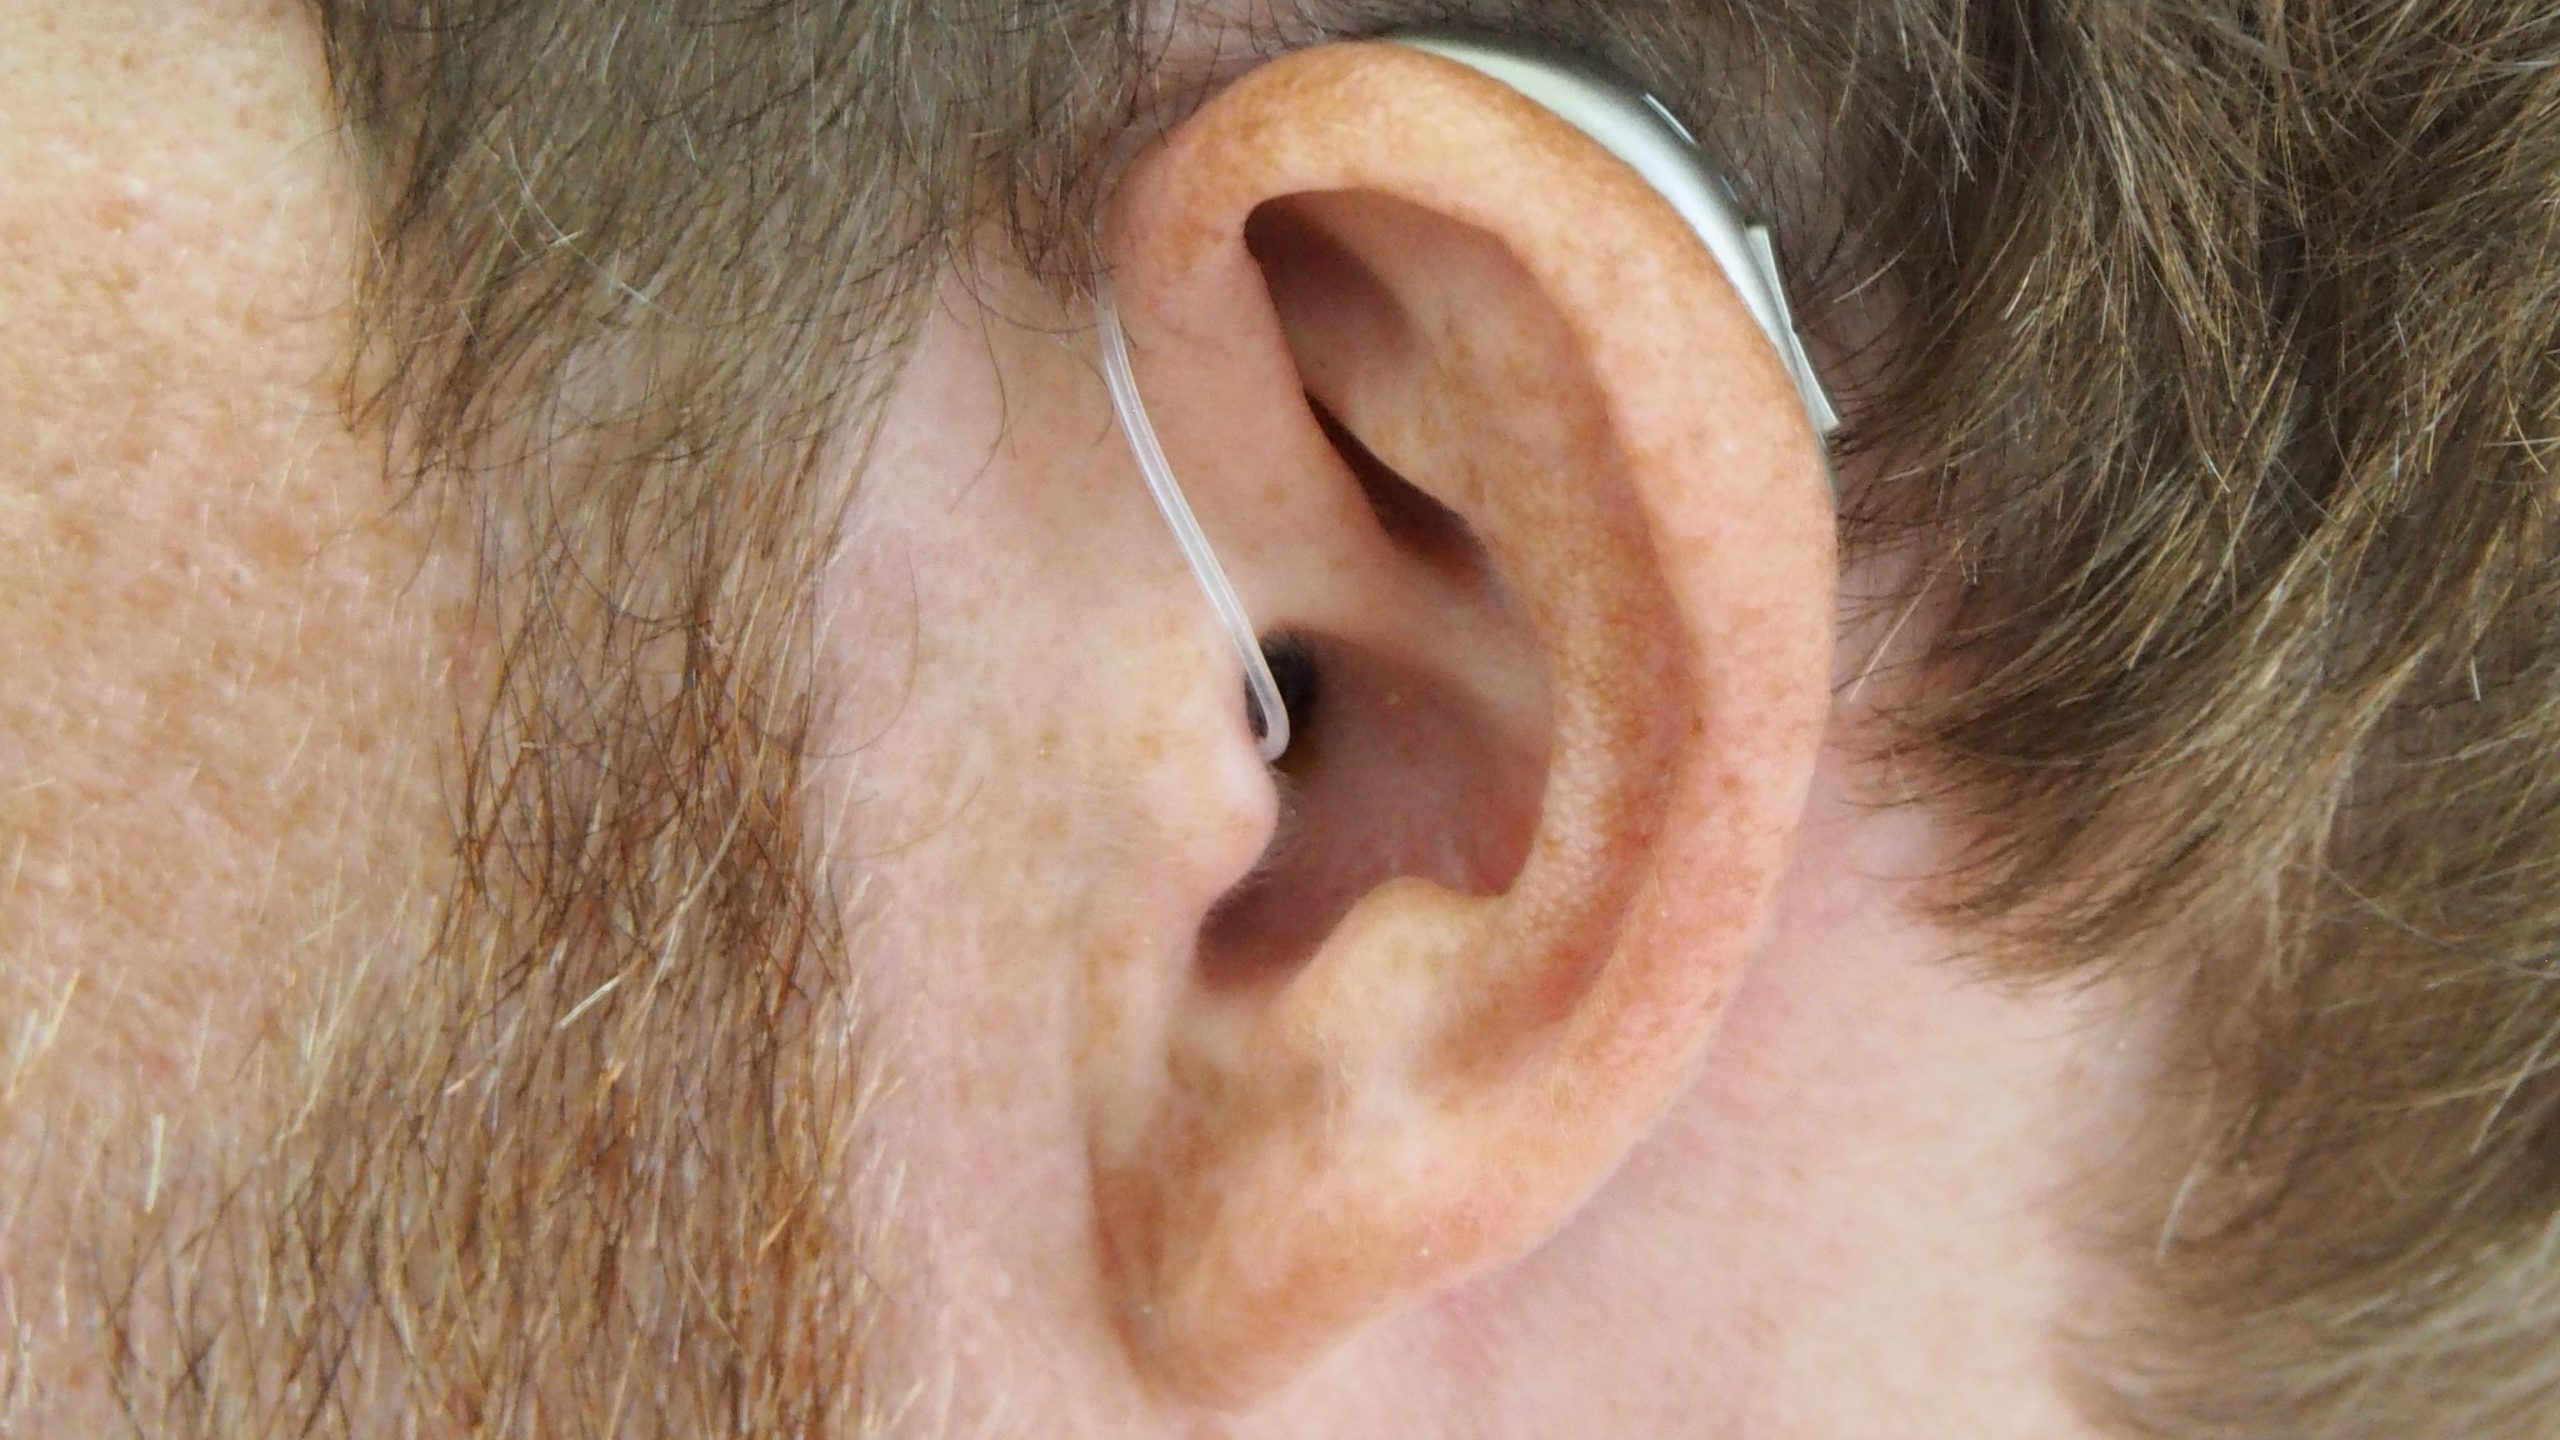 Ear with hearing aid